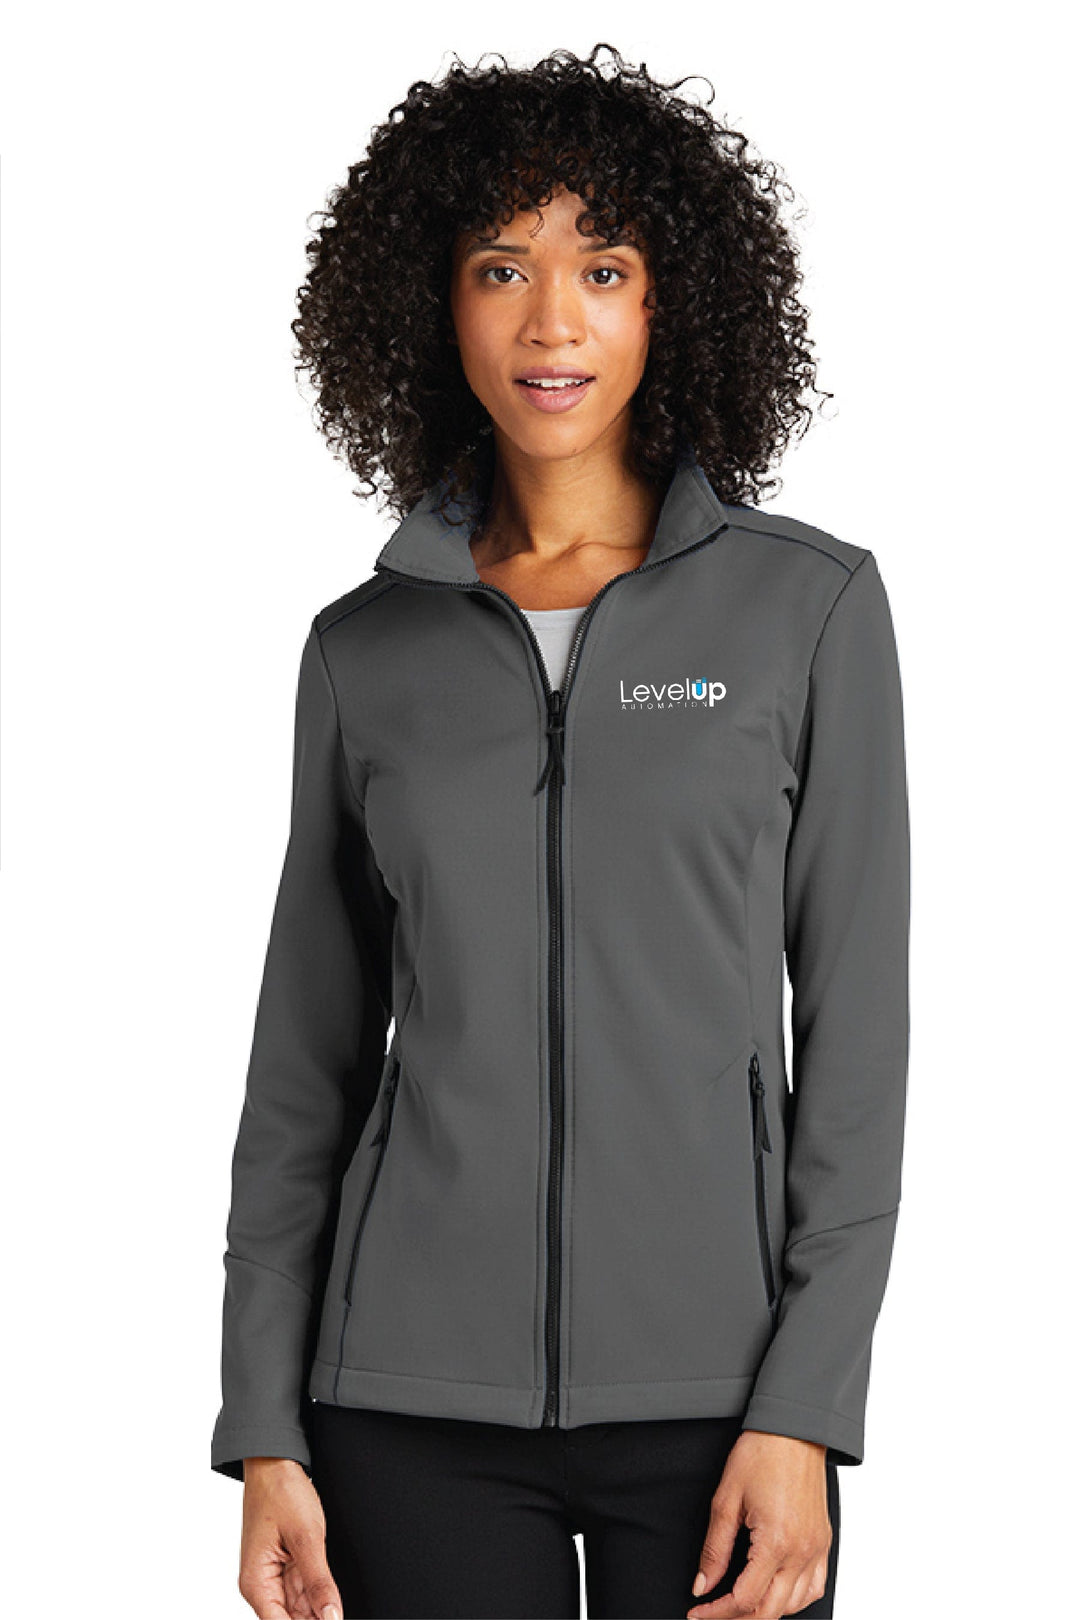 Level Up Automation Apparel & Accessories Women's Jacket  - Grey